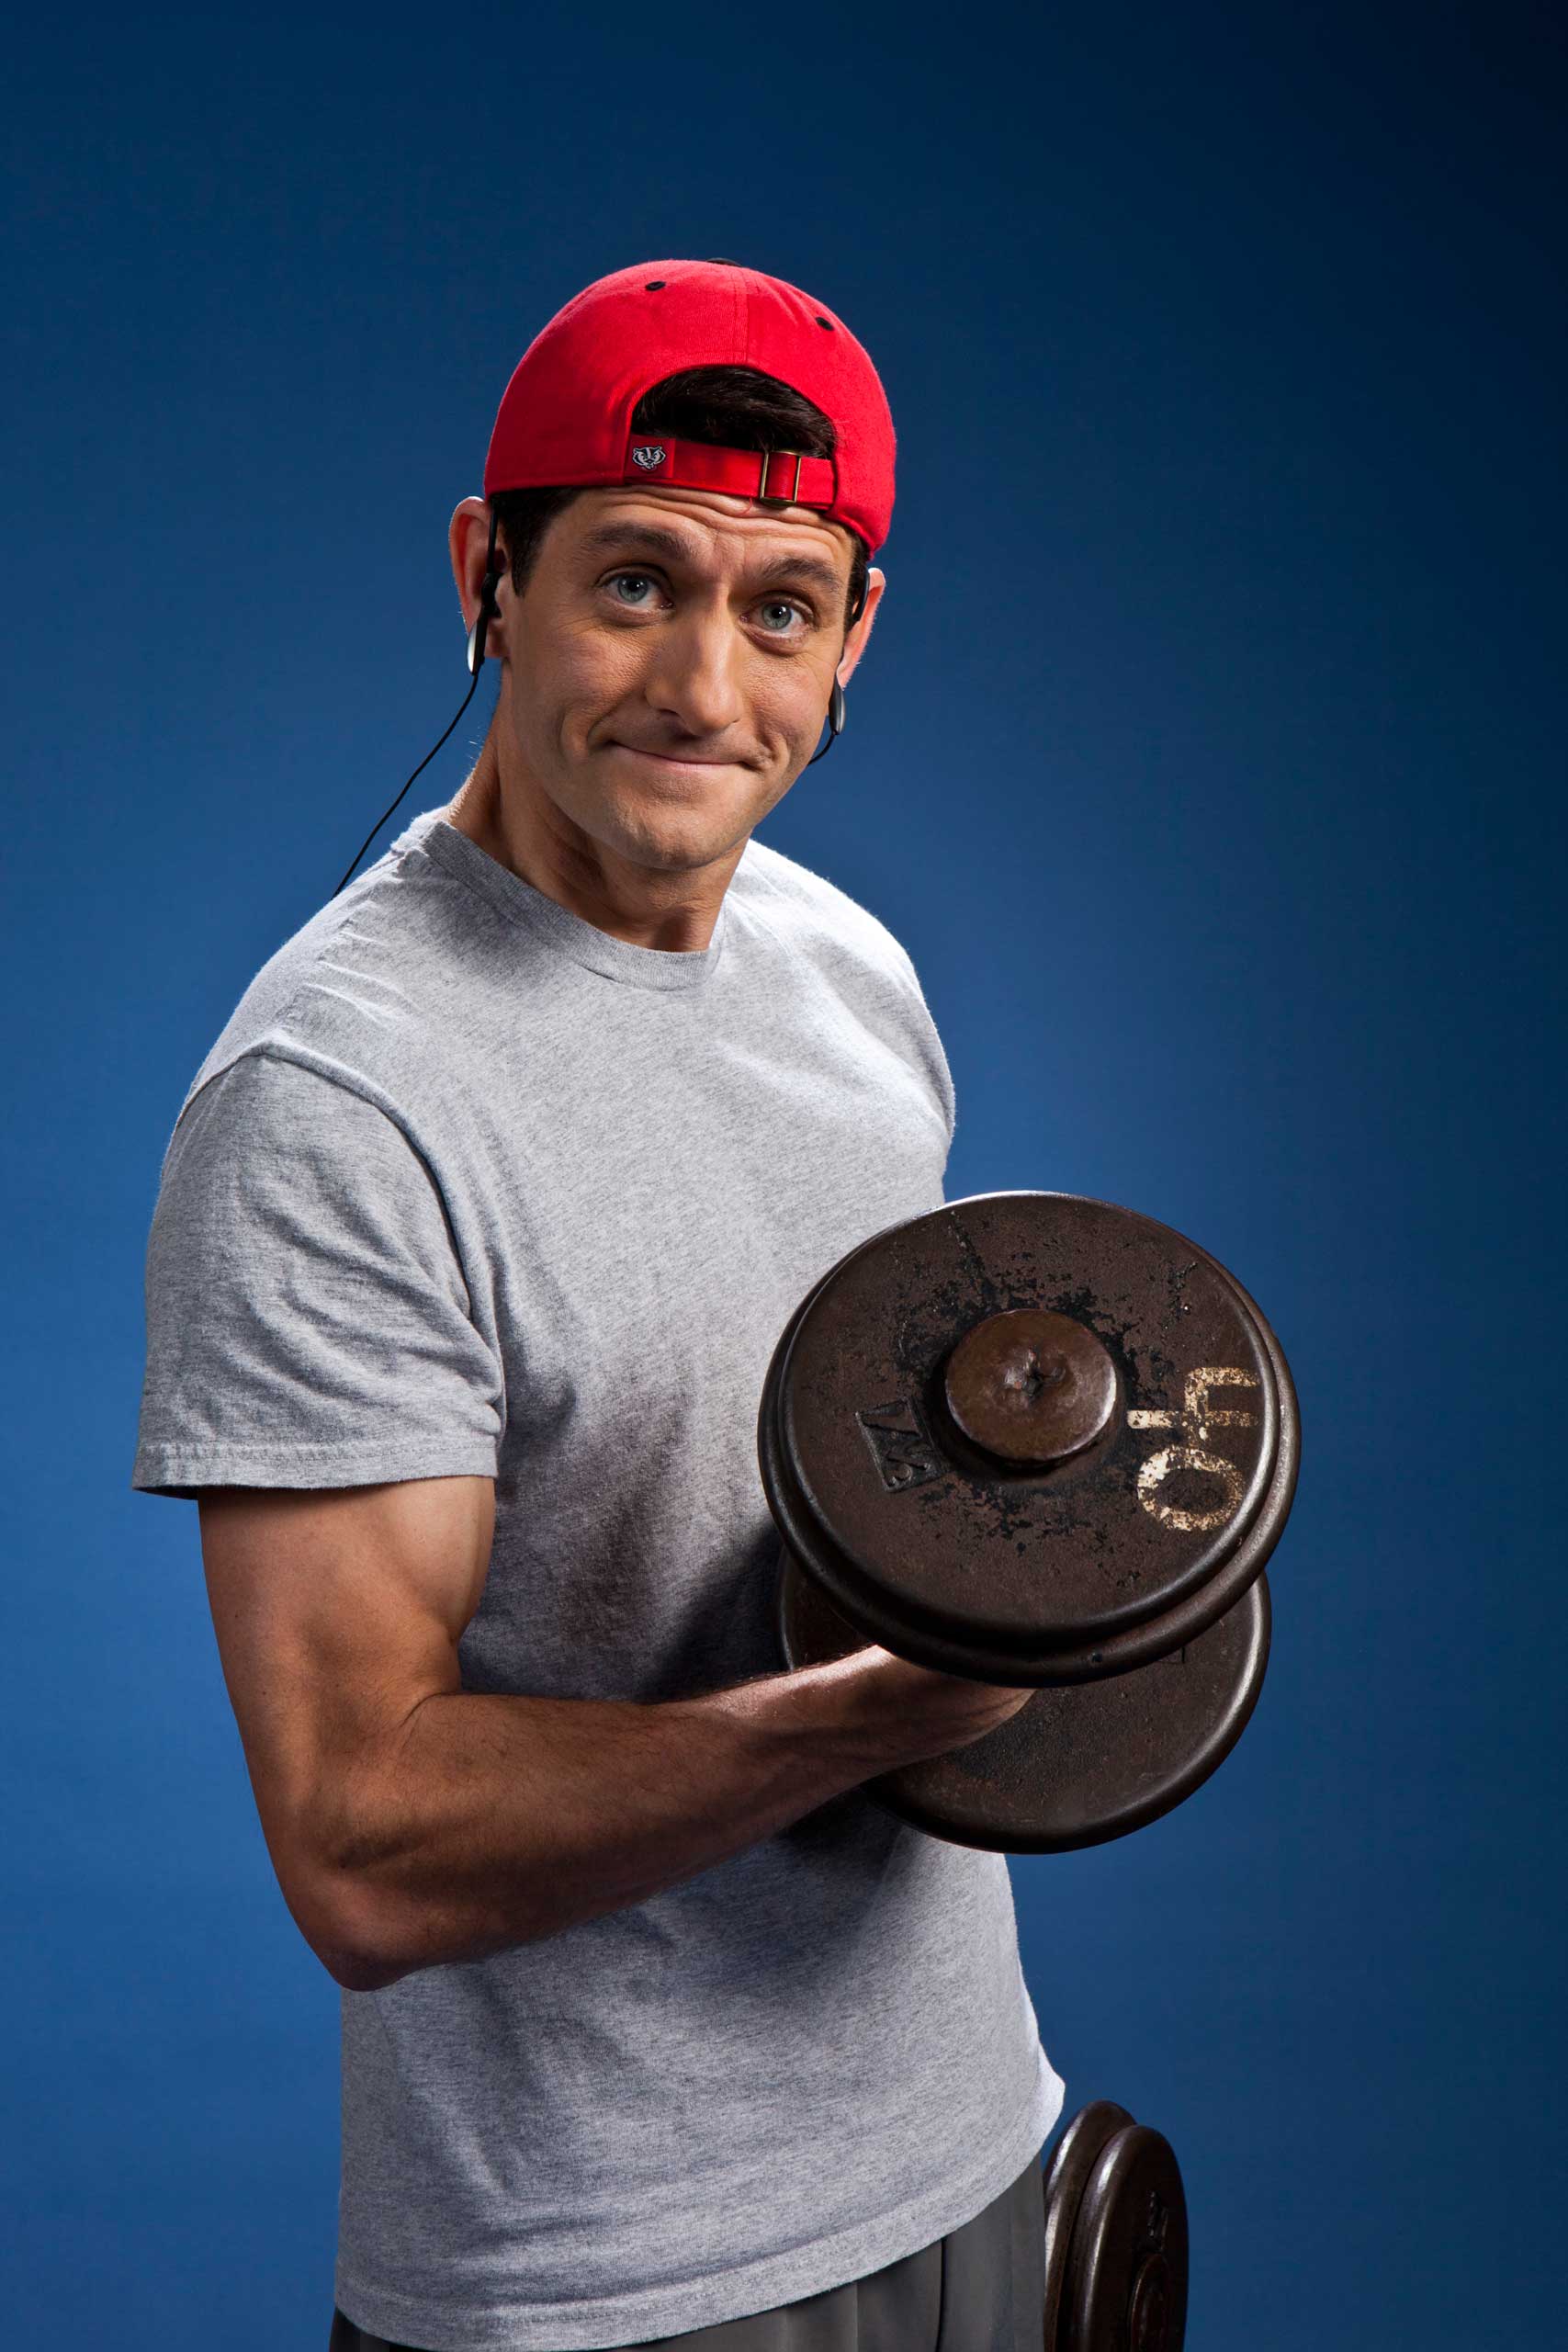 An outtake from the Paul Ryan photo shoot that was inspired by his Facebook photos showing him working out with P90X creator Tony Horton